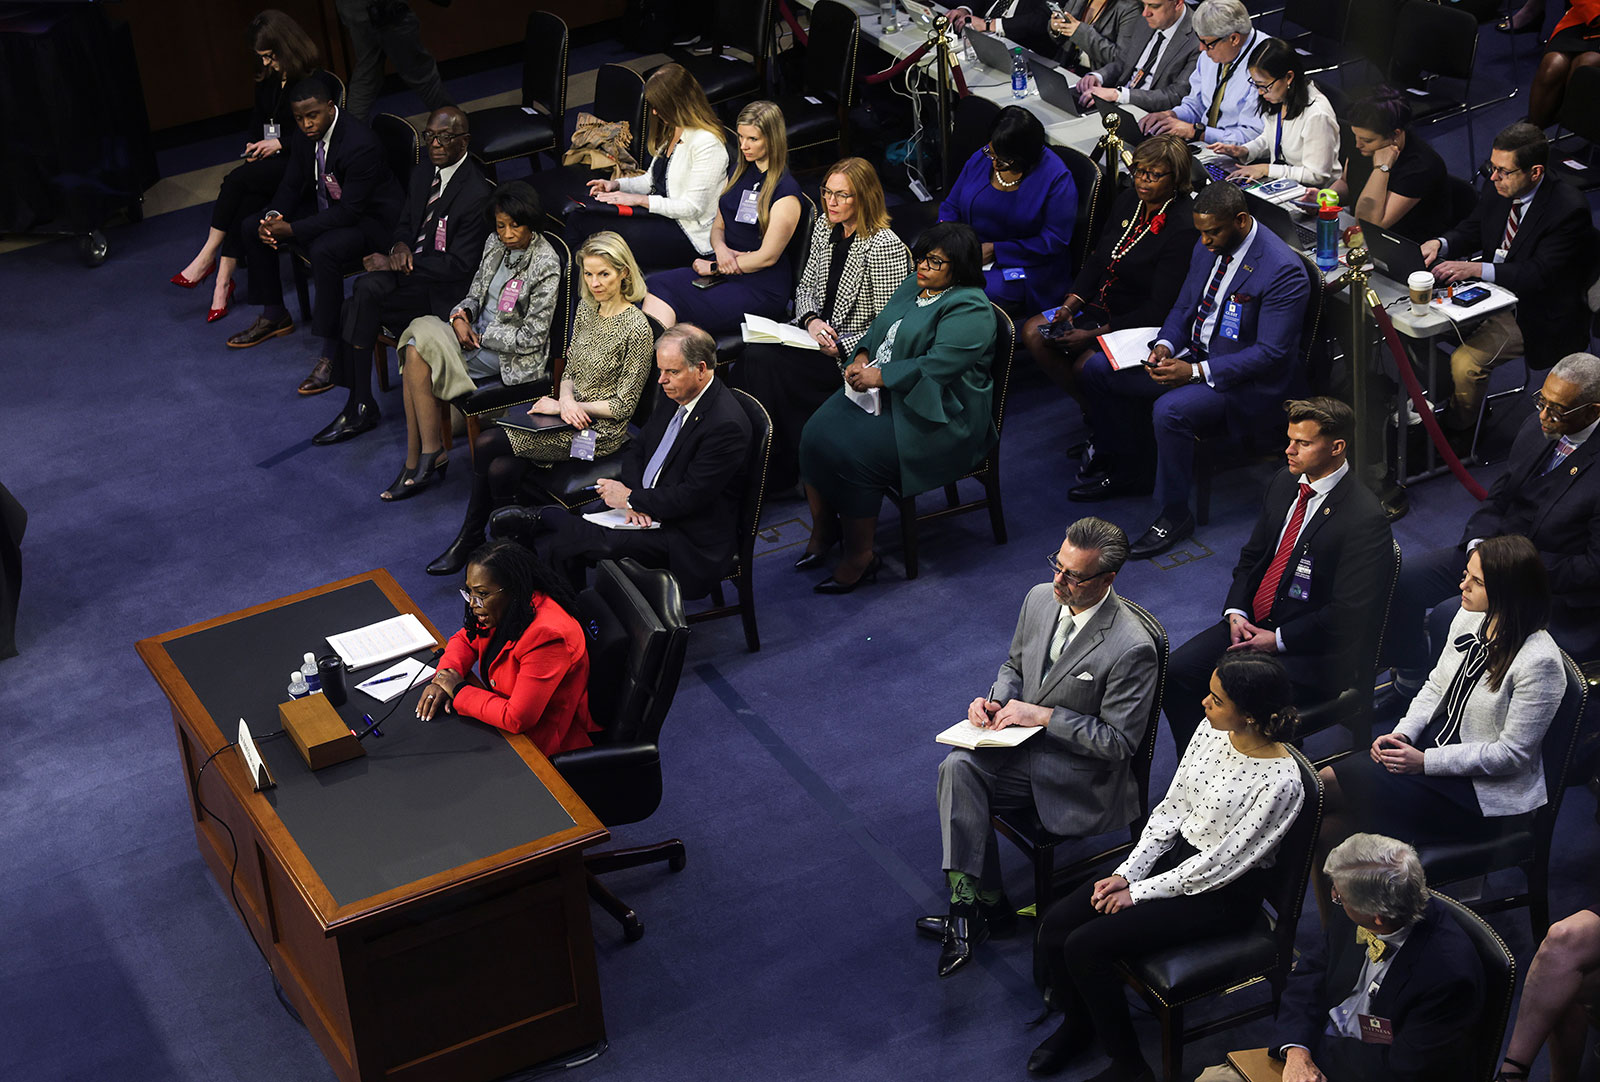 U.S. Supreme Court nominee Ketanji Brown Jackson answers during her confirmation hearing before the Senate Judiciary Committee.